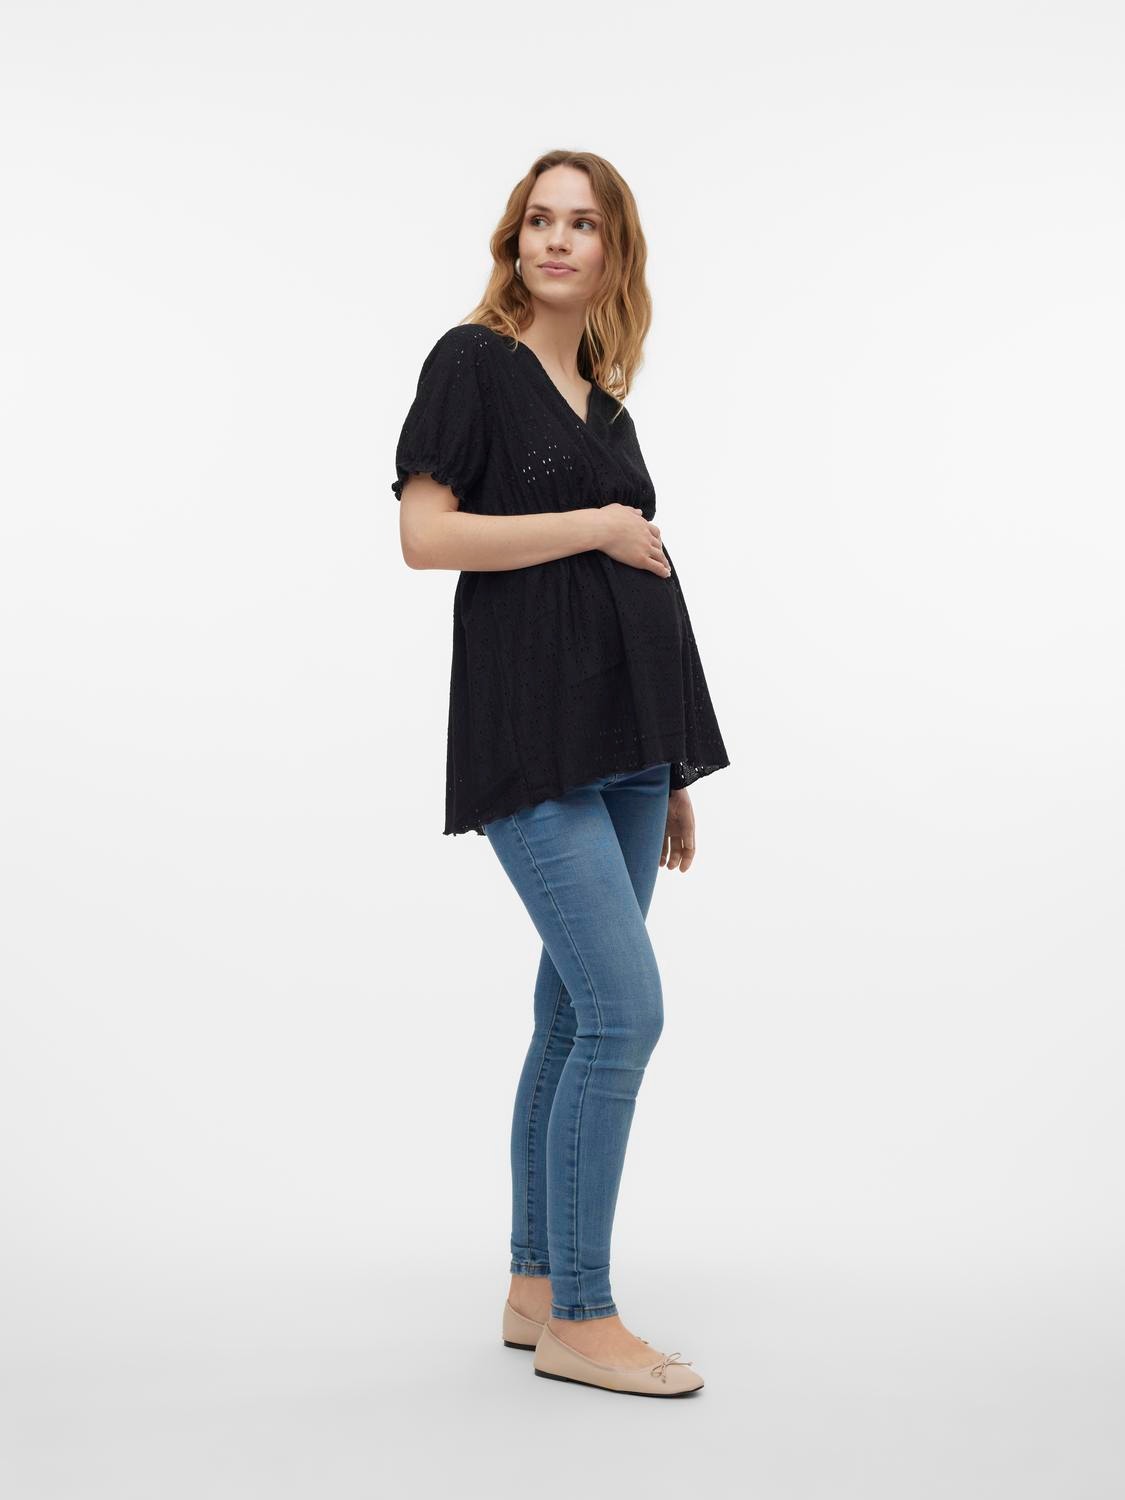 MAMA.LICIOUS Tops Regular Fit Col rond -Black - 20019125